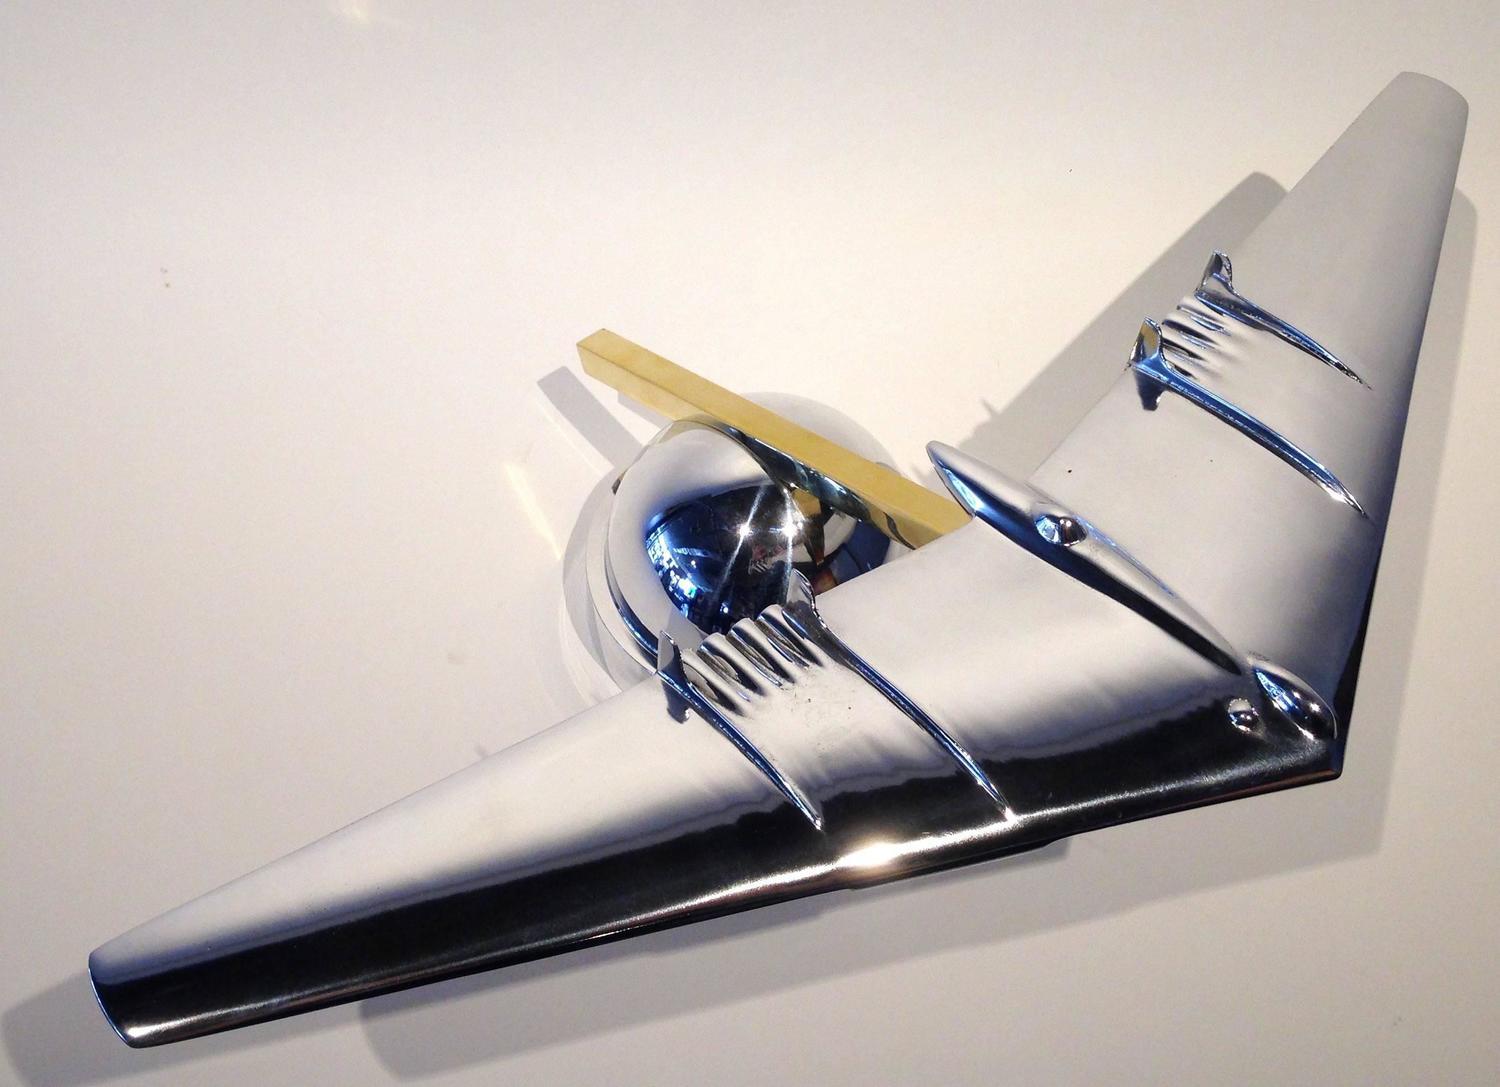 Art Deco Flying Wing Replica Sculpture by American Artist Phil Miller